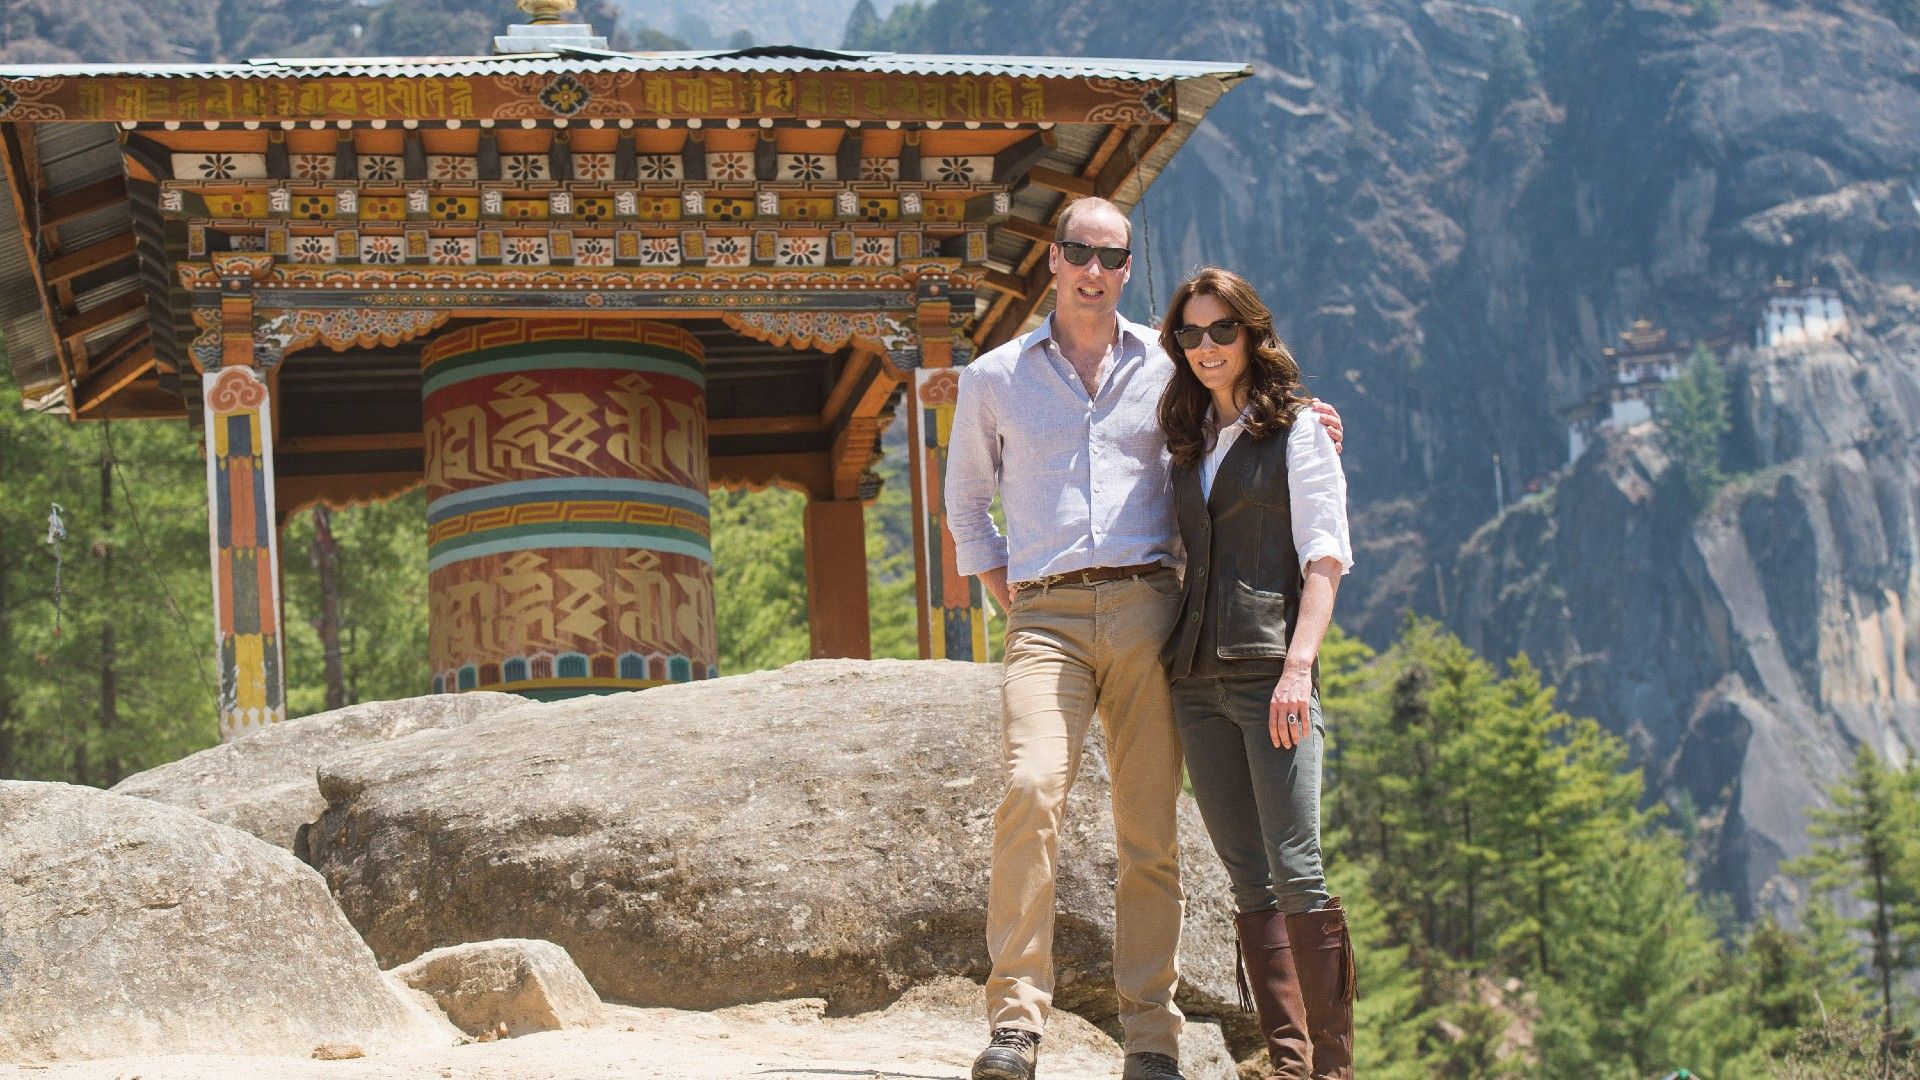 <p>                     In 2016, William and Kate embarked on a seven day tour of India and Bhutan.                   </p>                                      <p>                     For the exciting trip, the sporty pair, who are equally at home in walking boots and khakis as they are ballgowns and tuxedos, donned some activewear (no doubt including a pair of Kate's go-to walking boots) for a hike up Paro Taktsang, the Tiger’s Nest monastery.                   </p>                                      <p>                     It was a gruelling five-hour, high-altitude hike through the Himalayas - not that you'd tell from how effortlessly the pair made it look.                   </p>